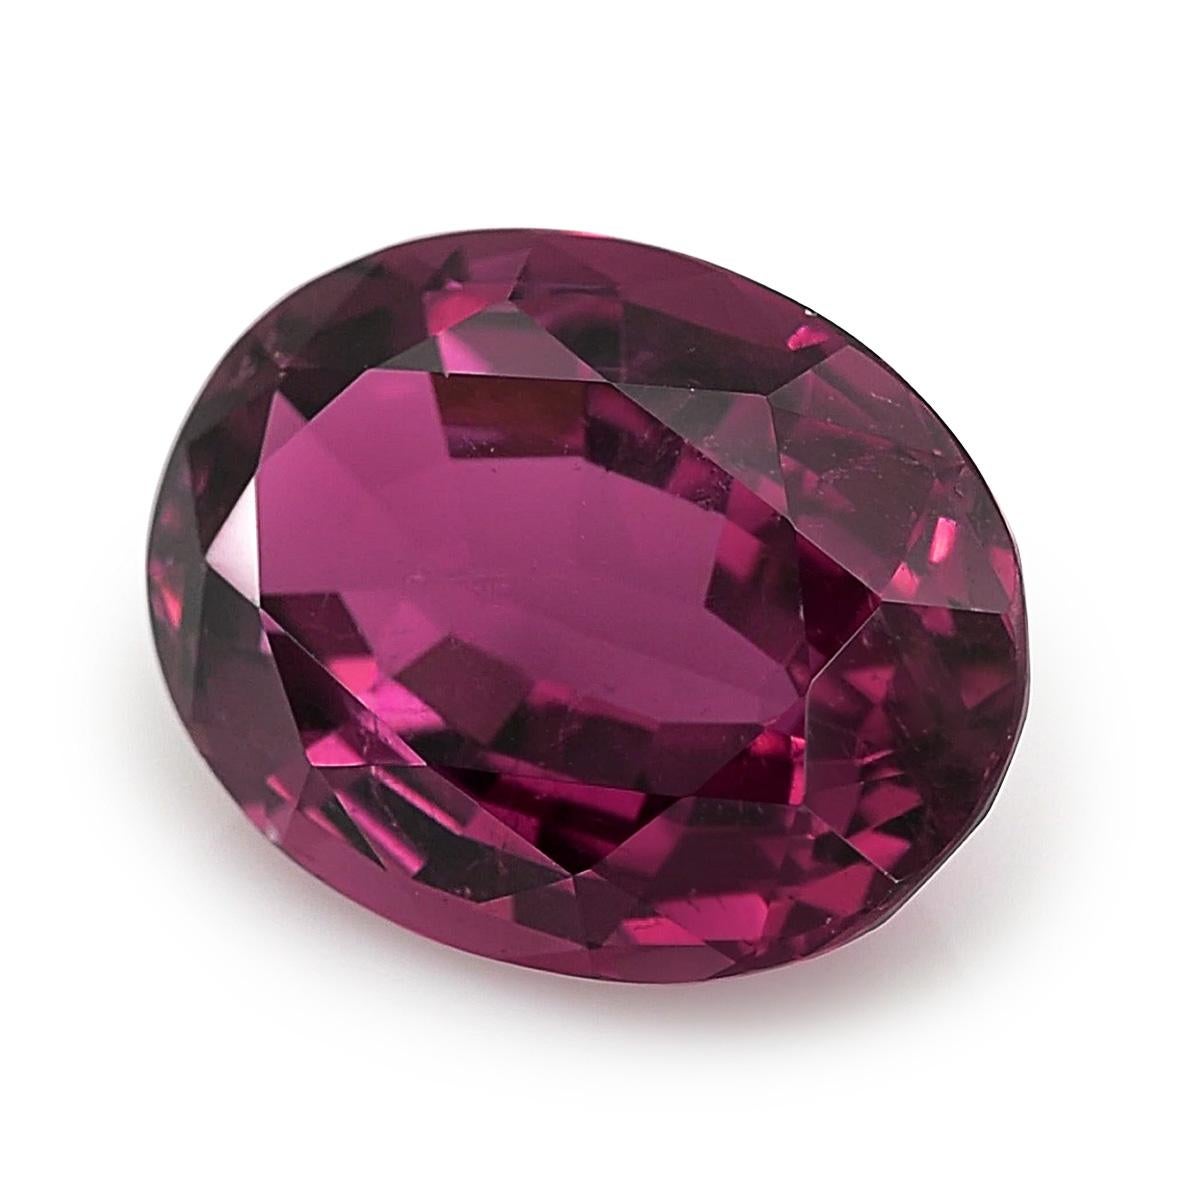 Identification: Natural Rubellite 9.70 carats

Carat: 9.70 carats
Shape: Oval
Measurements: 16.19 x 12.01 x 7.45 mm 
Cut: Brilliant/Step
Color: Red
Clarity: very eye clean

Discover a captivating Natural Rubellite, boasting a substantial 9.70 carats